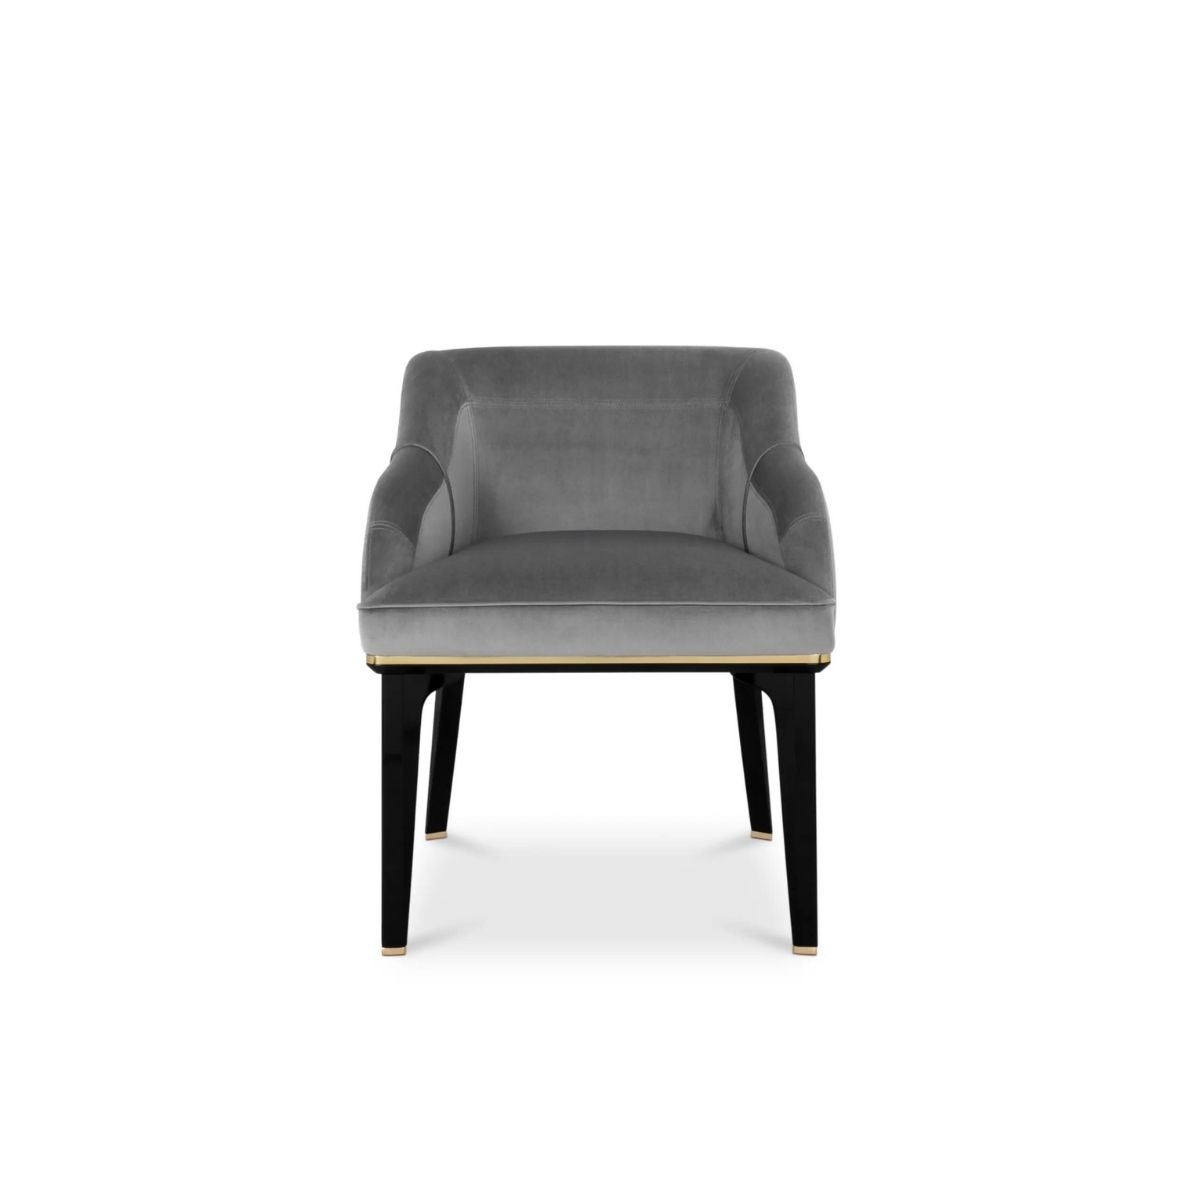 saboteur dining chair luxxu covet house Hera Round Two Sofa